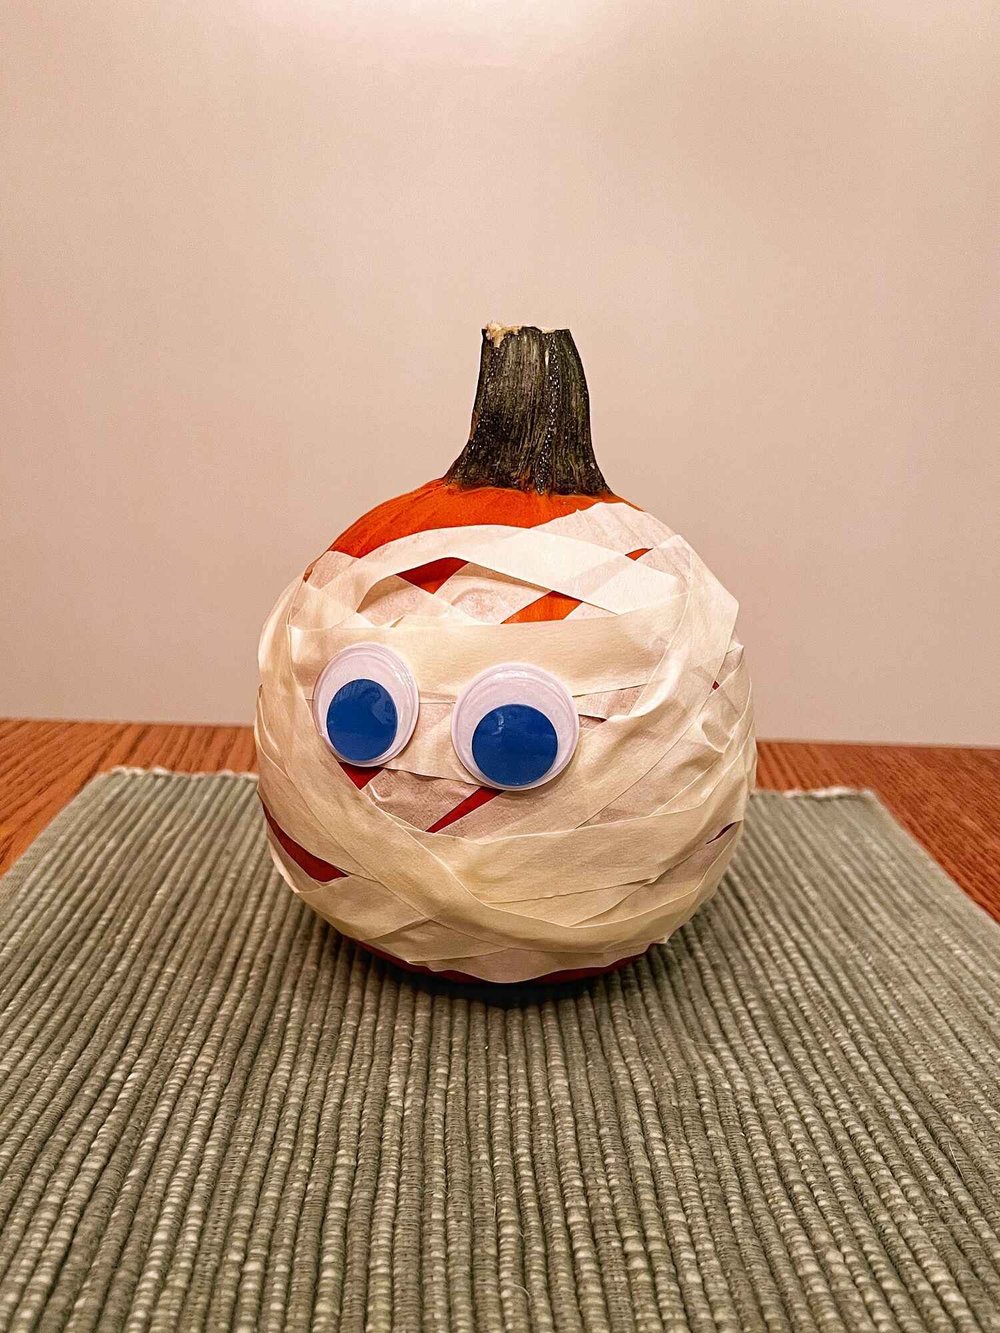 No Carve Pumpkin Decorating Ideas for Your Toddler - Masking Tape Mummy